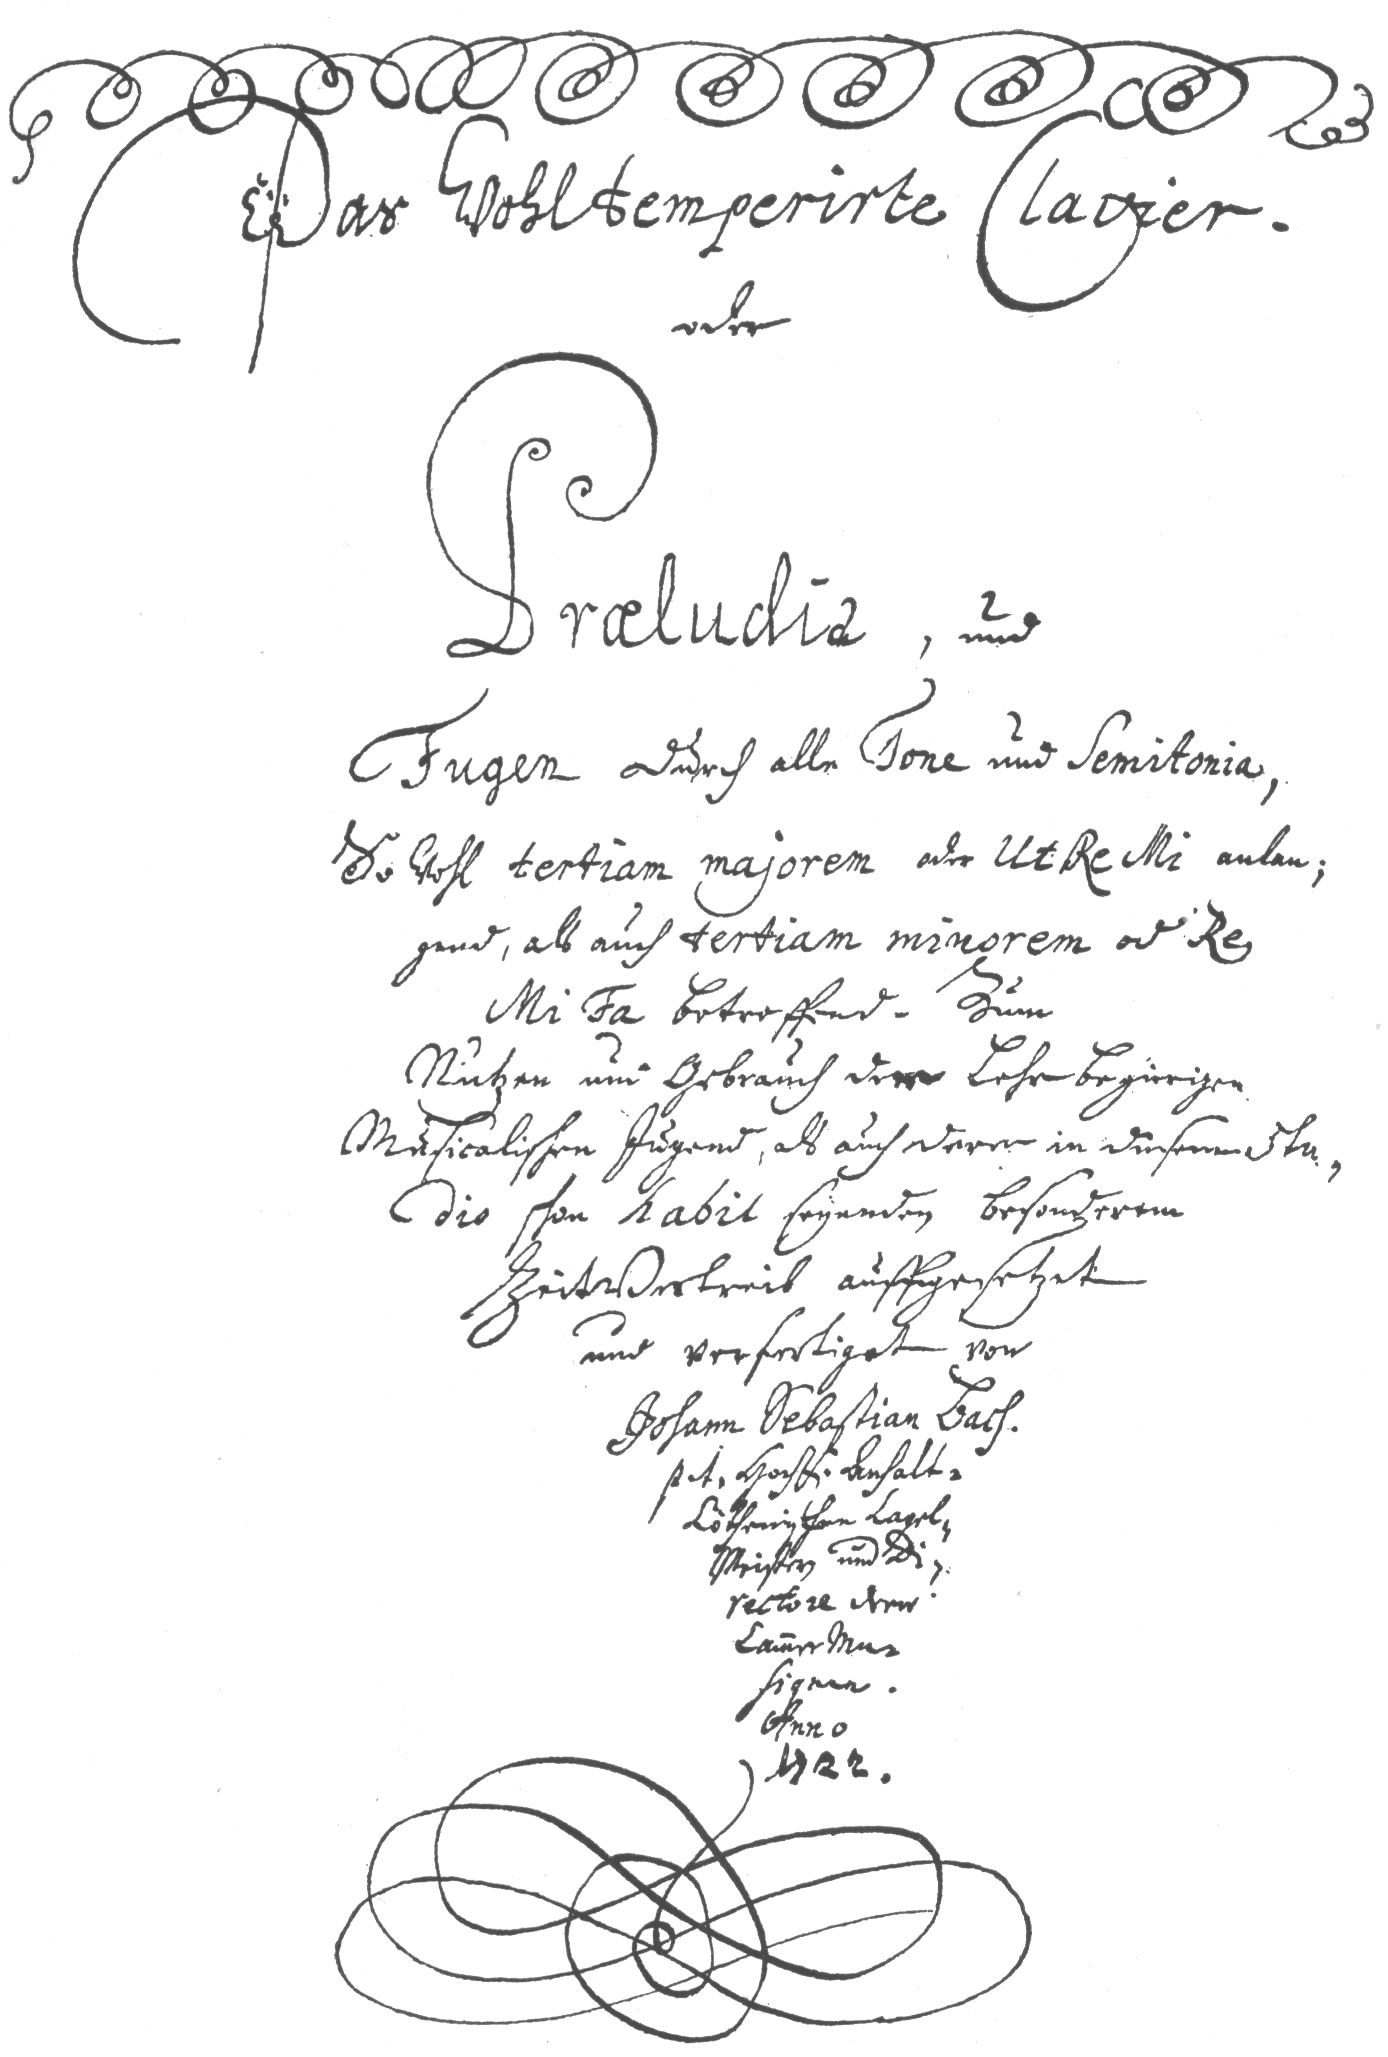 Bach's title page, 1722, from Grove Dictionary 1911